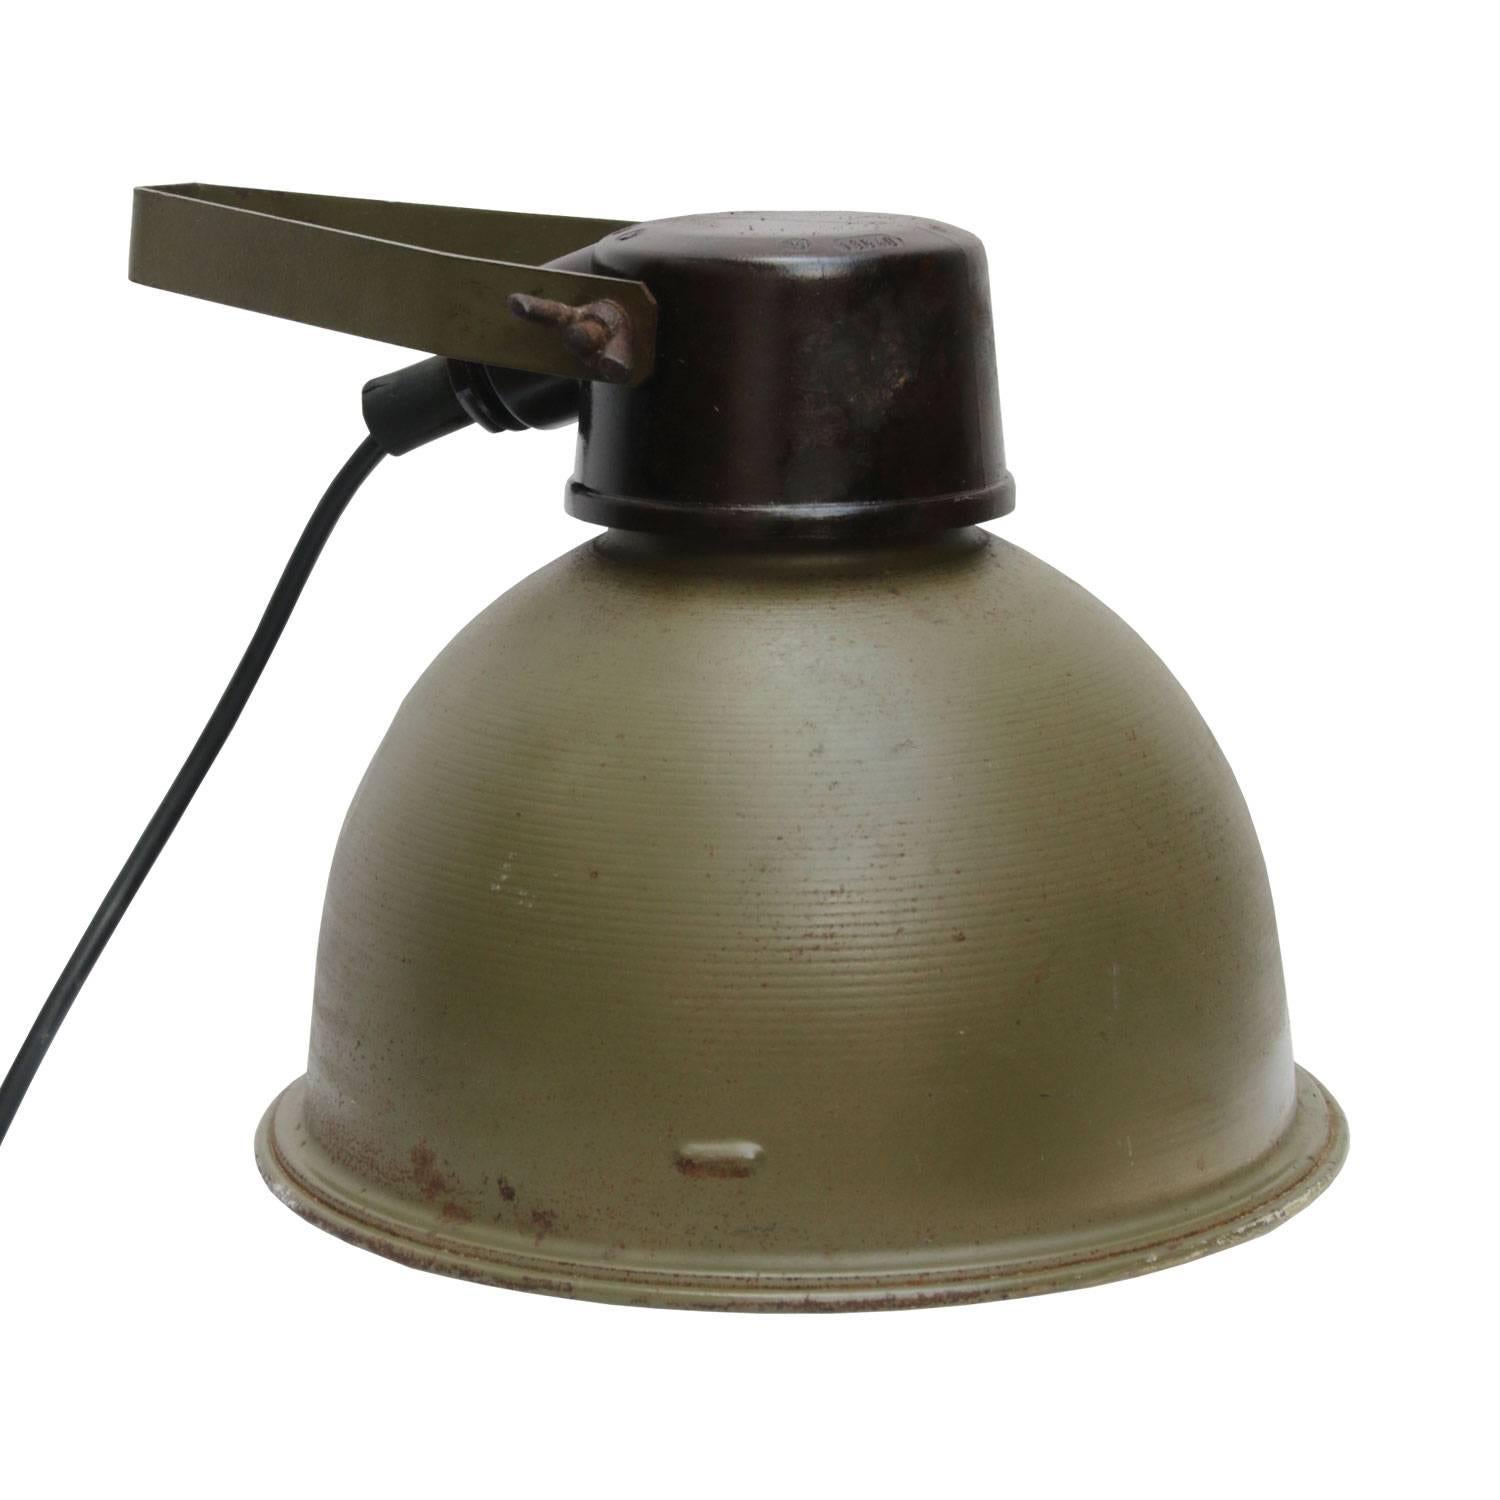 Metal wall spot light scone wall light. Army green metal shade. White interior.
Bakelite top and adjustable in angle.

Weight: 0.5 kg / 1.1 lb.

Priced per individual item. All lamps have been made suitable by international standards for